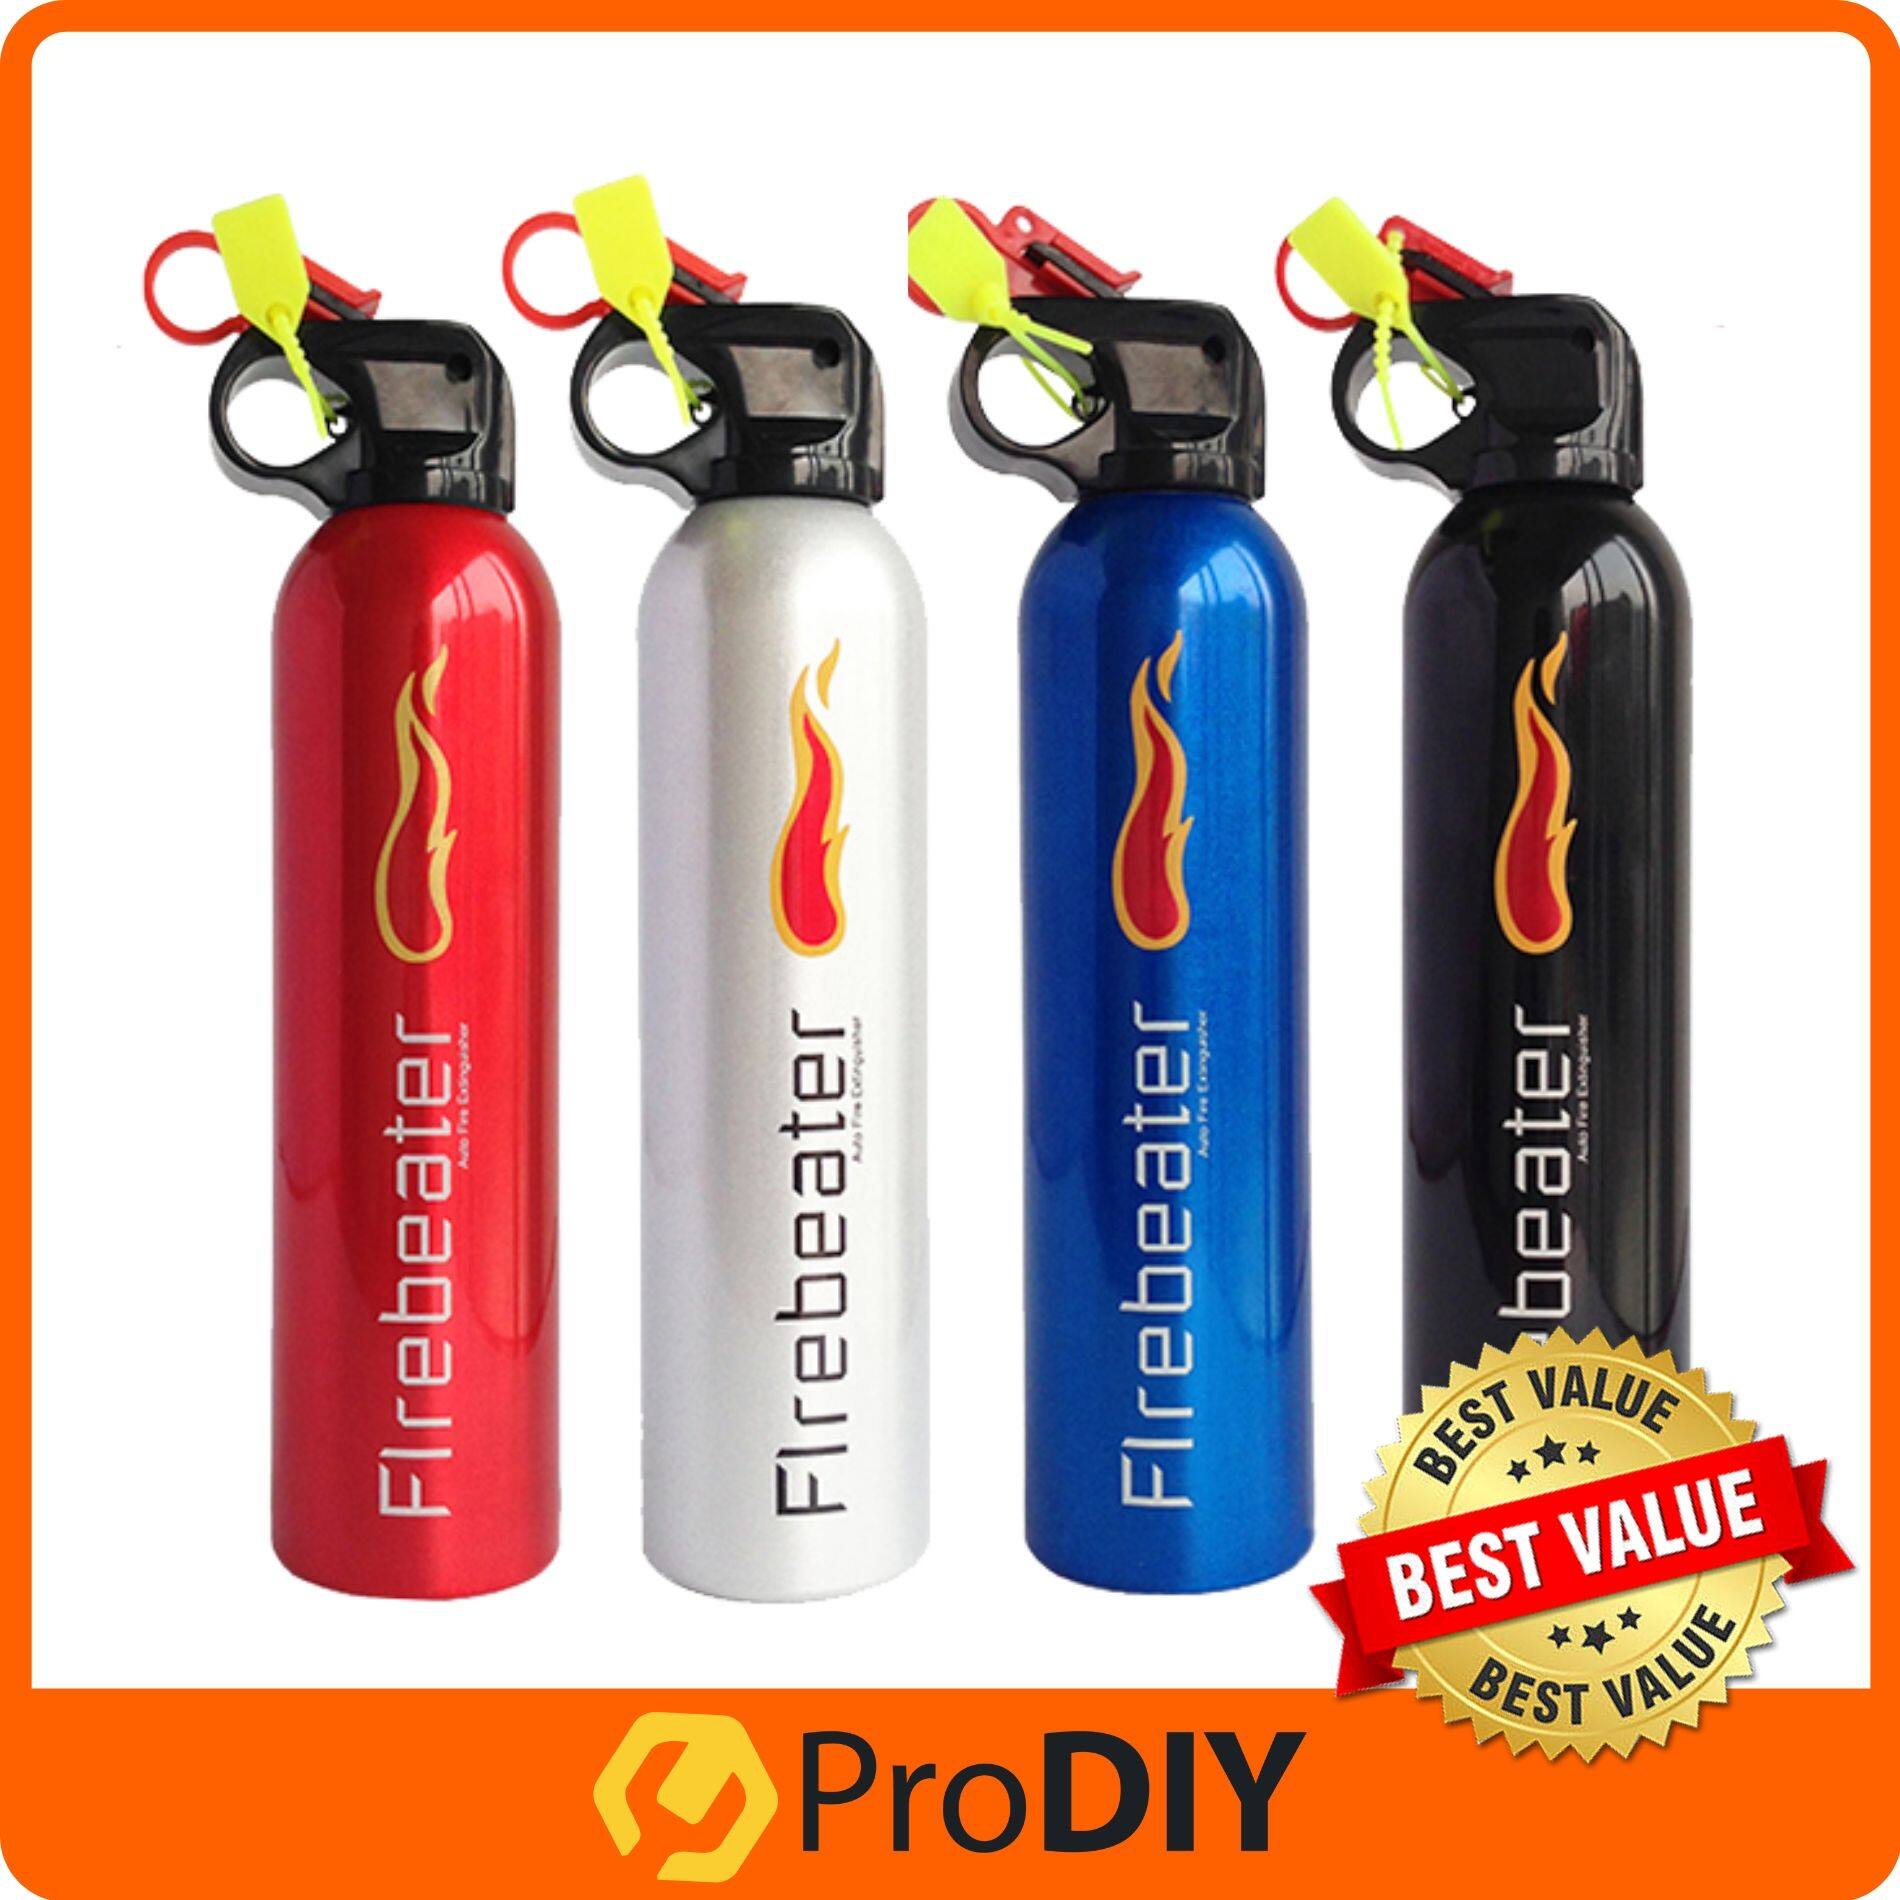 buy fire extinguisher for home